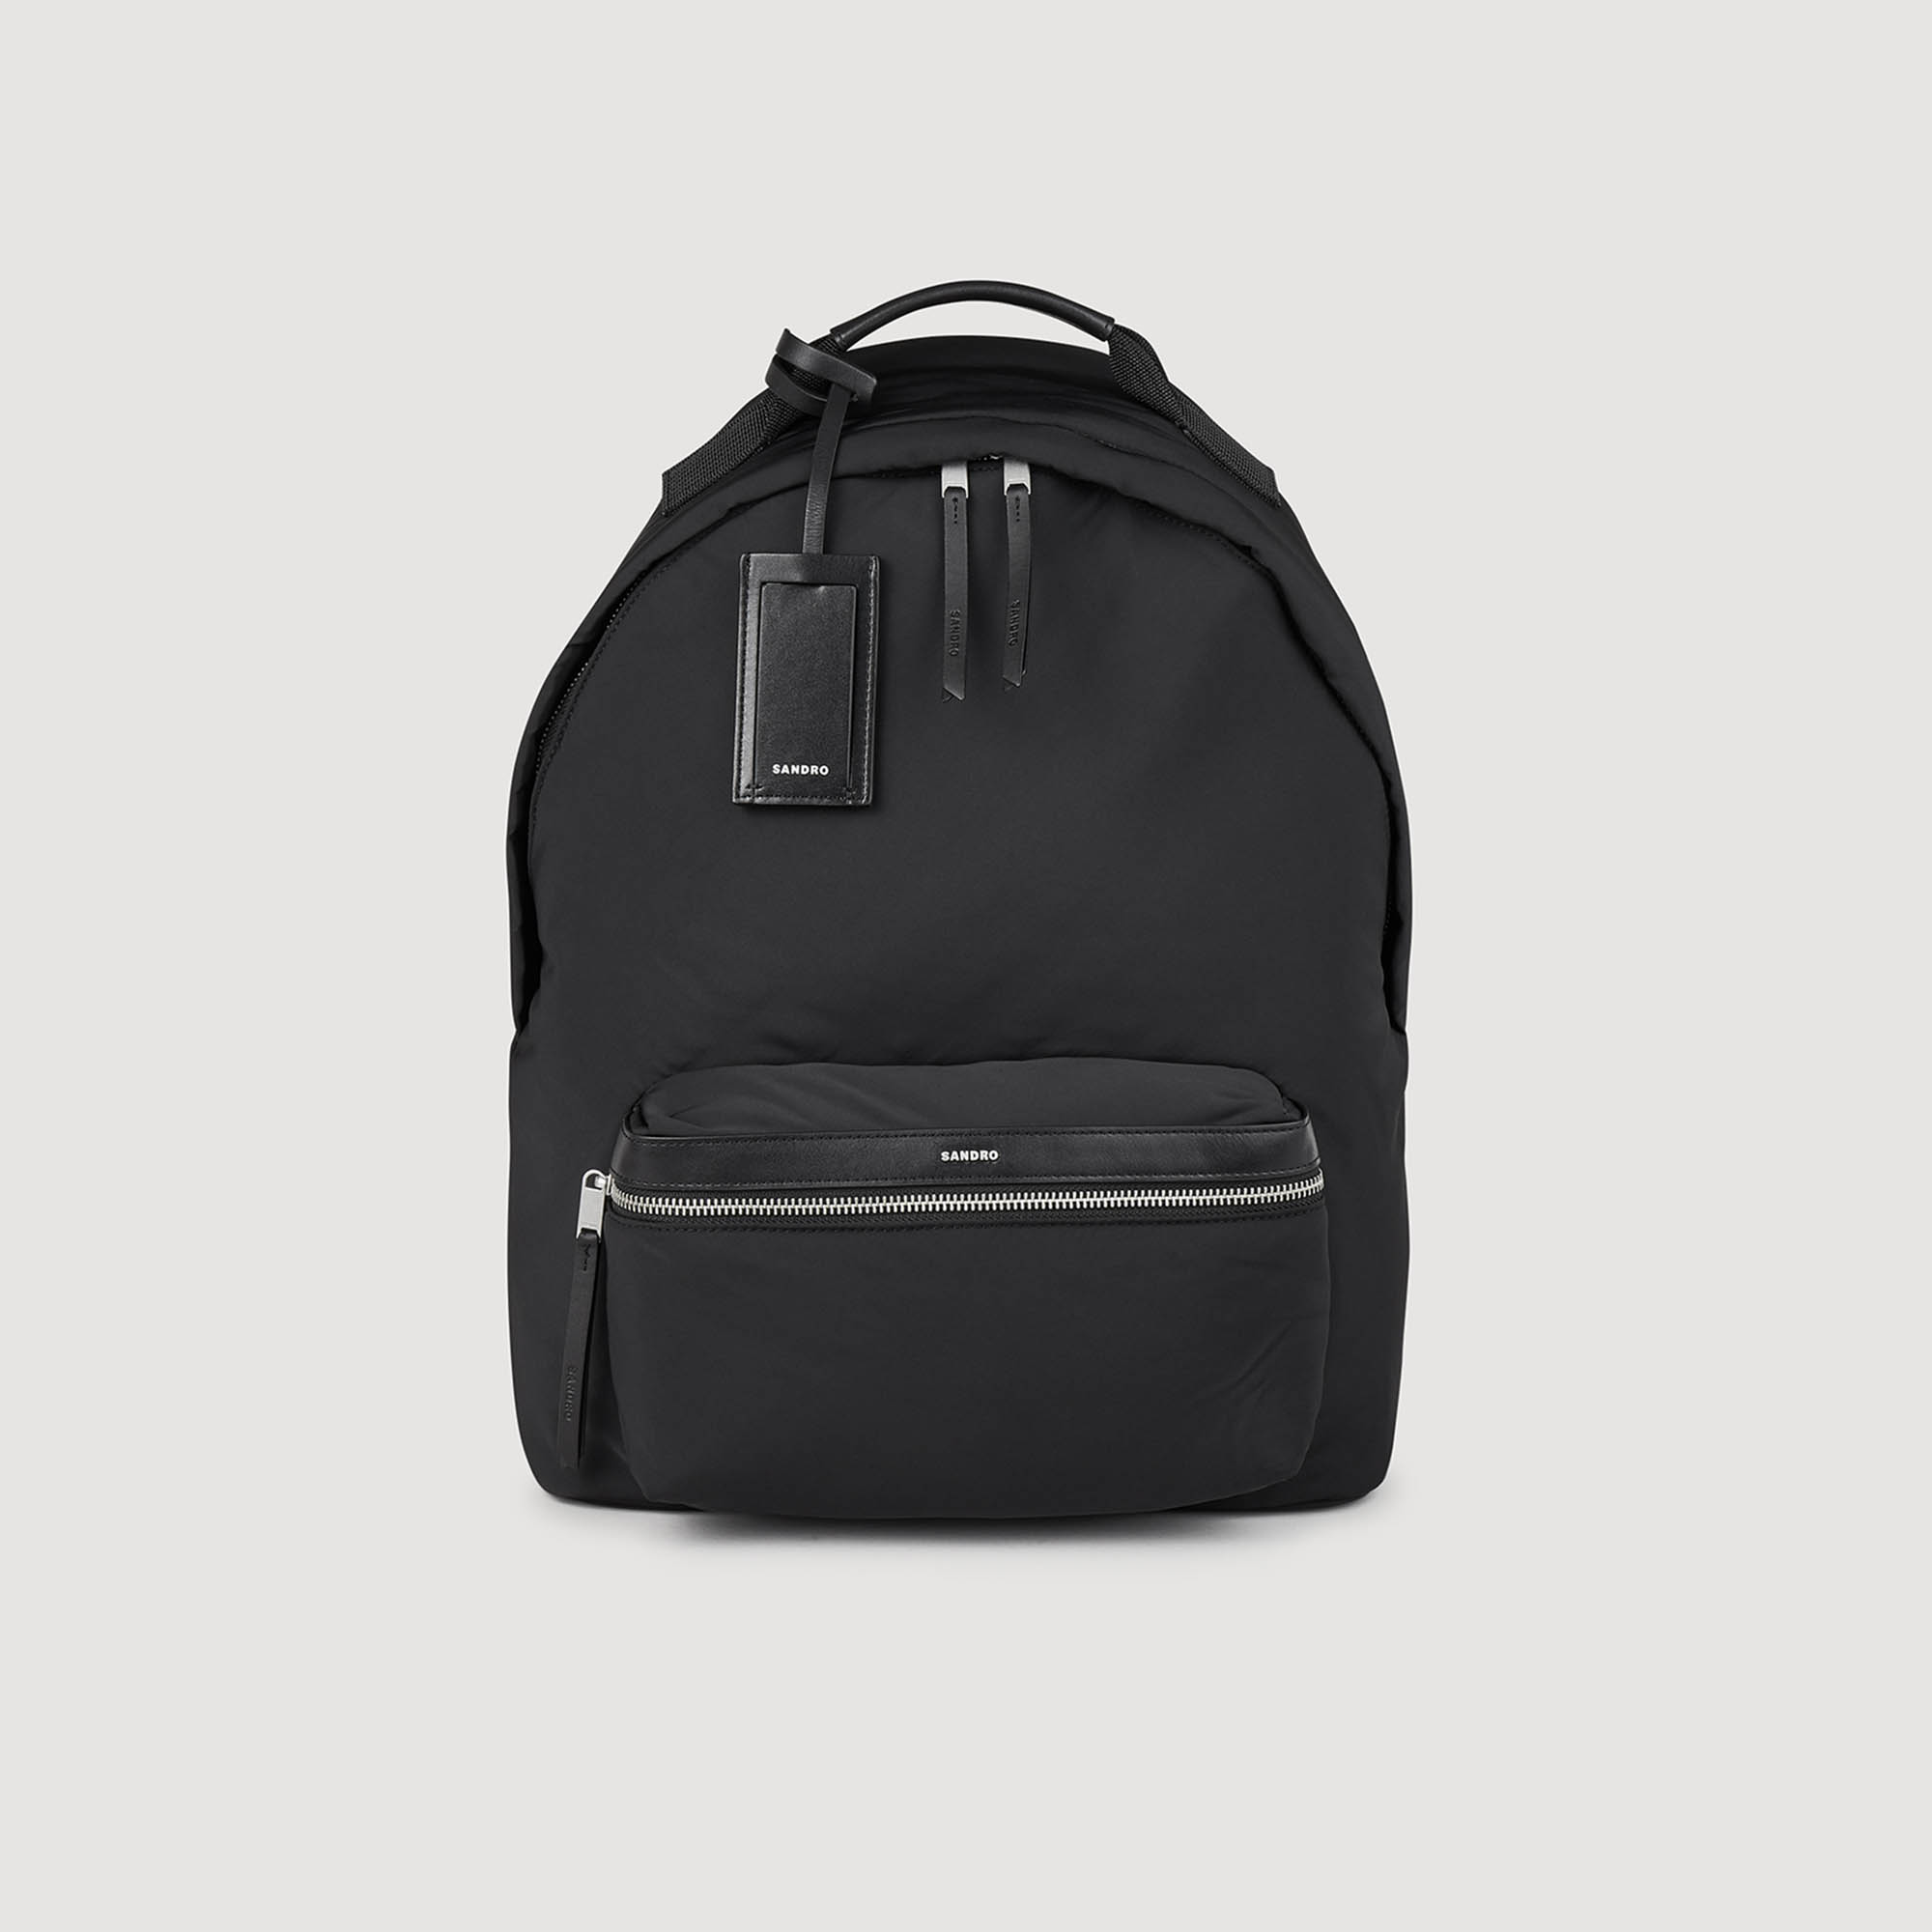 Sandro Canvas and Leather Backpack